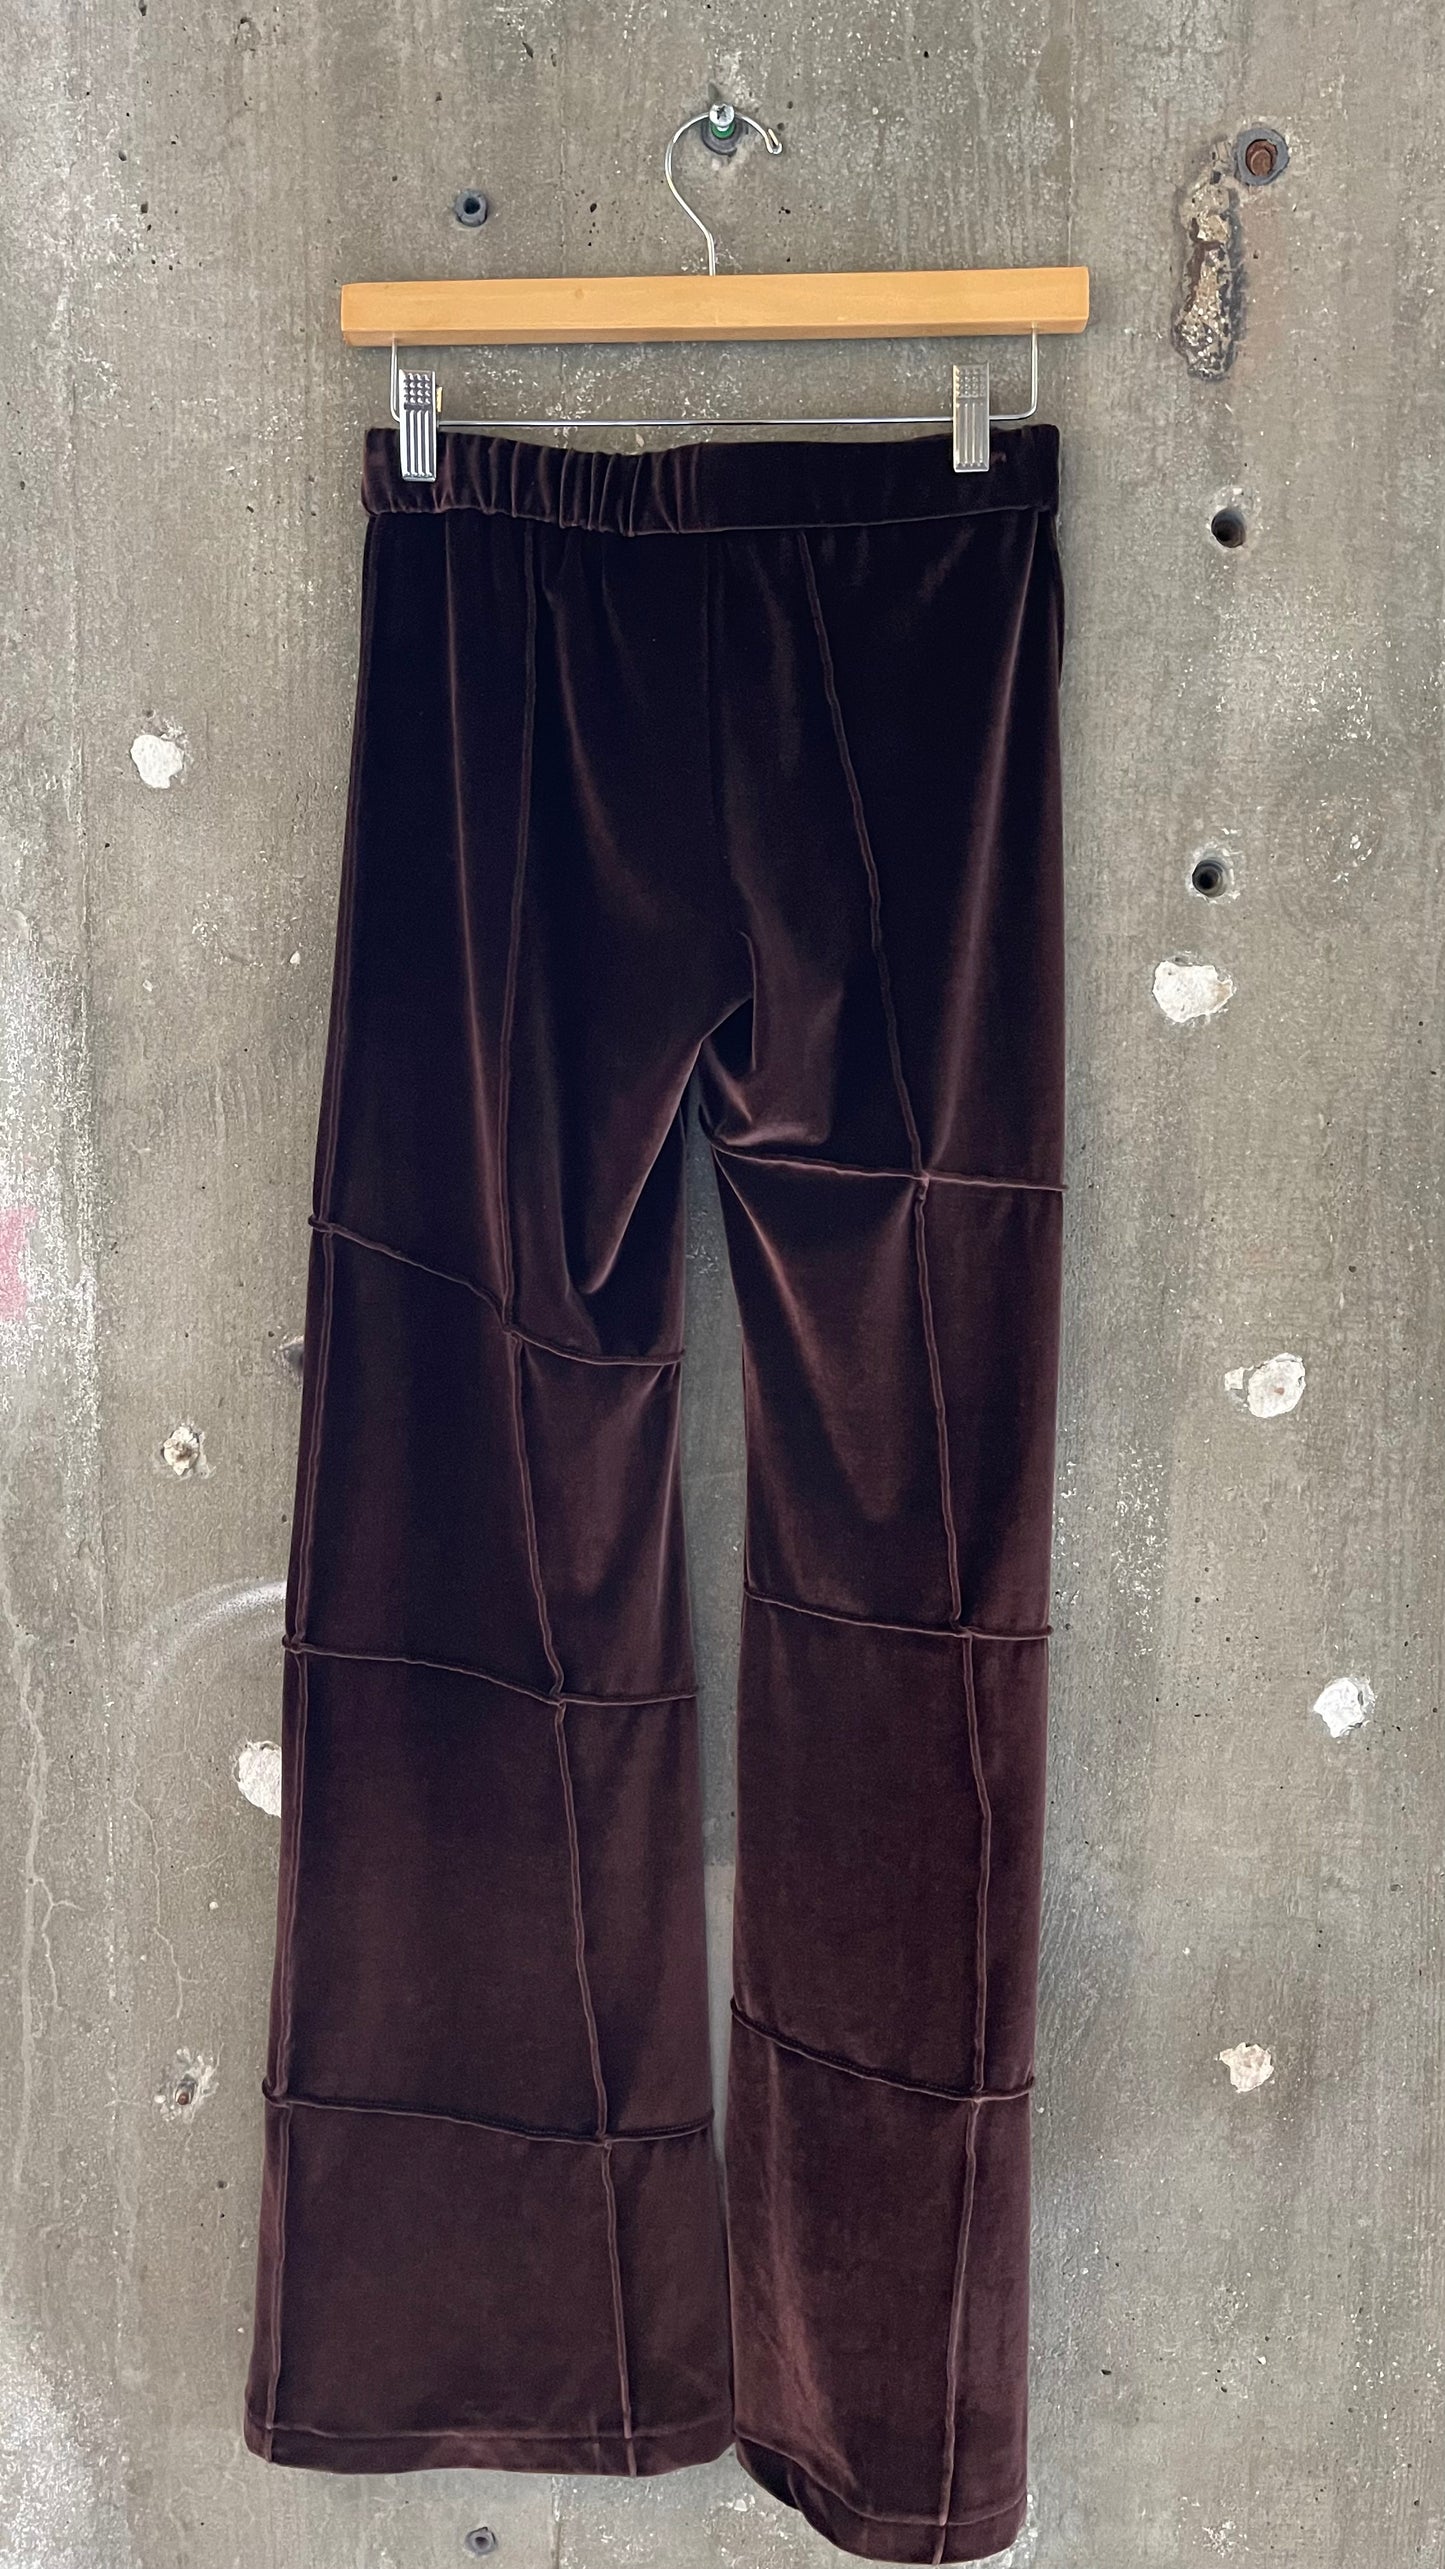 Karlaid Law Brown Flared Spider Pant